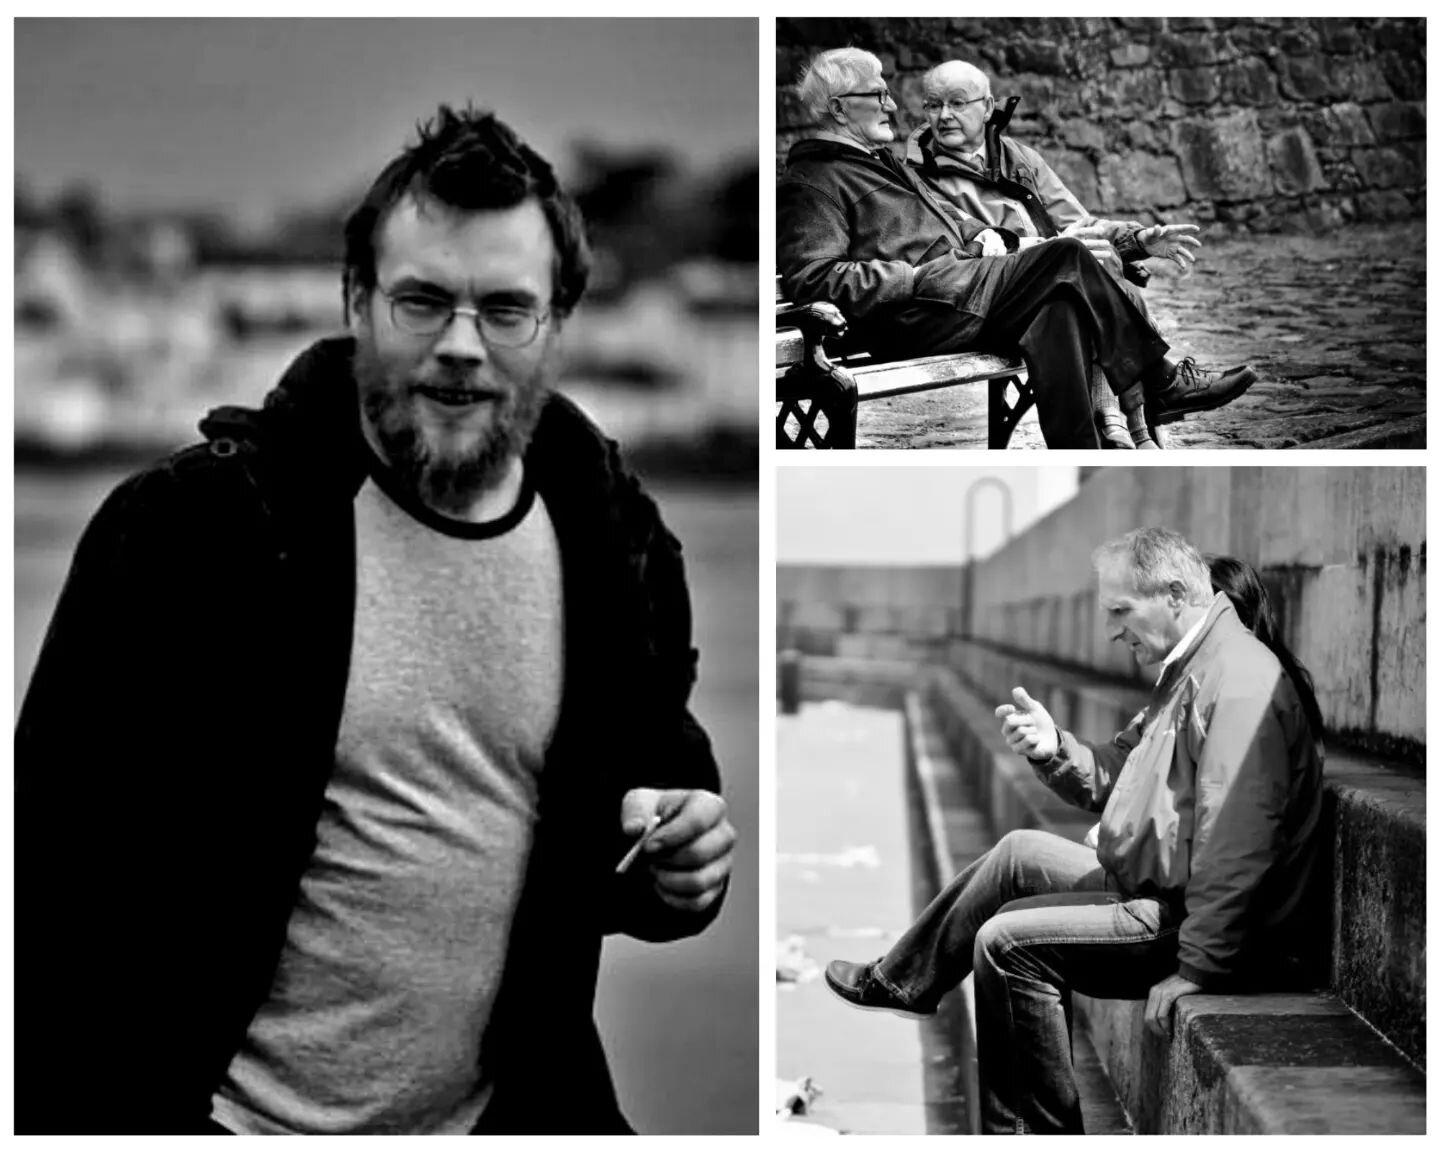 A little people watching along the pier, always an interest in people's expressions and how they talk with their body language.

#JGPhotoNI  #PeopleWatching #blackandwhitephotography #streetphotography  #candidportraits  #donaghadee